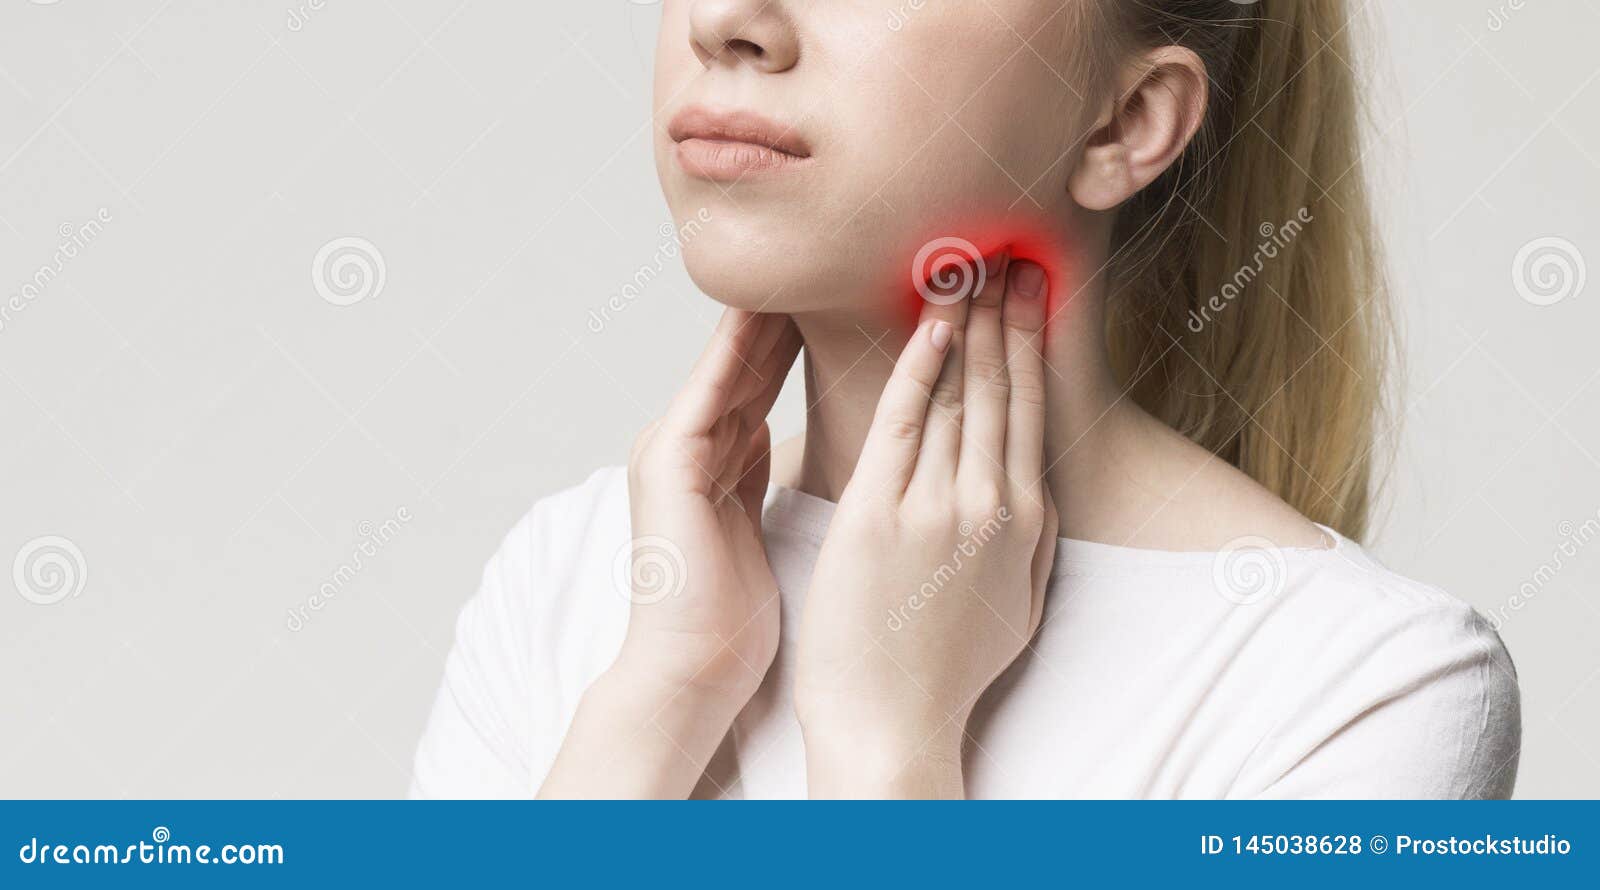 Woman With Thyroid Gland Problem Touching Her Neck Stock Photo Image